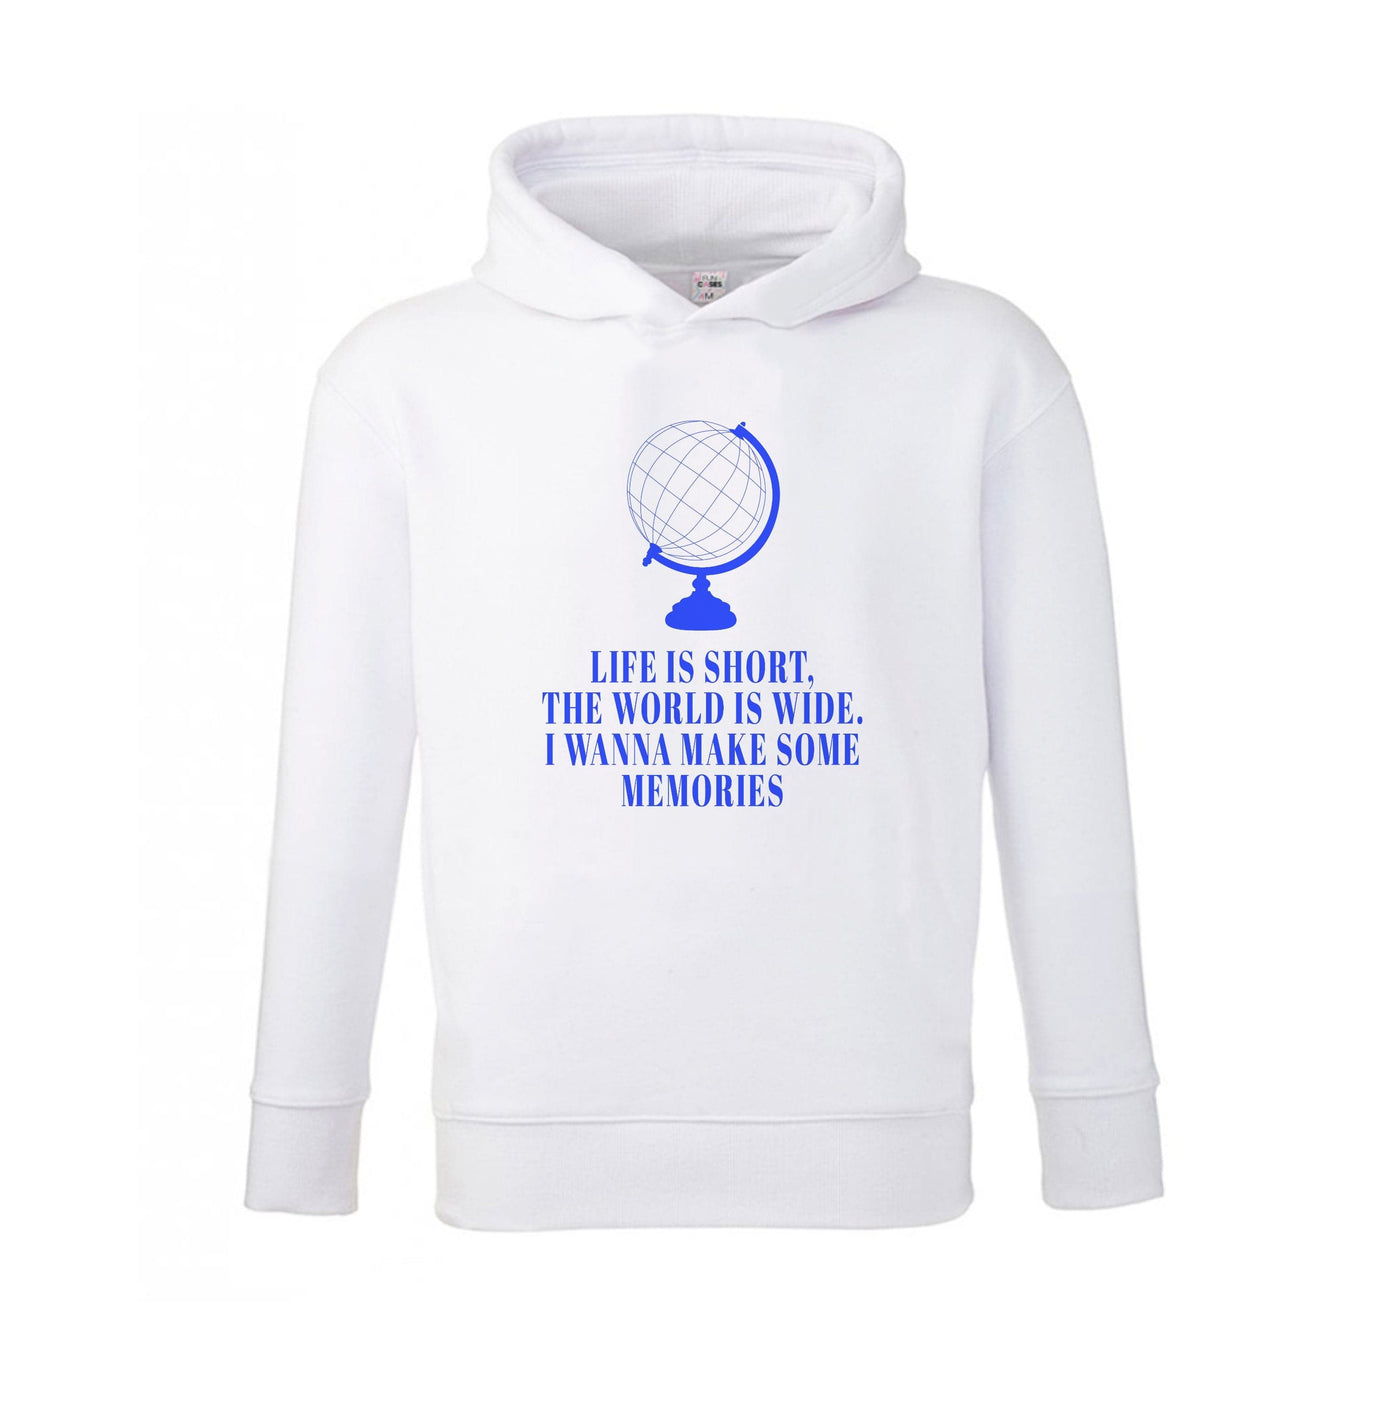 Life Is Short The World Is Wide - Mamma Mia Kids Hoodie